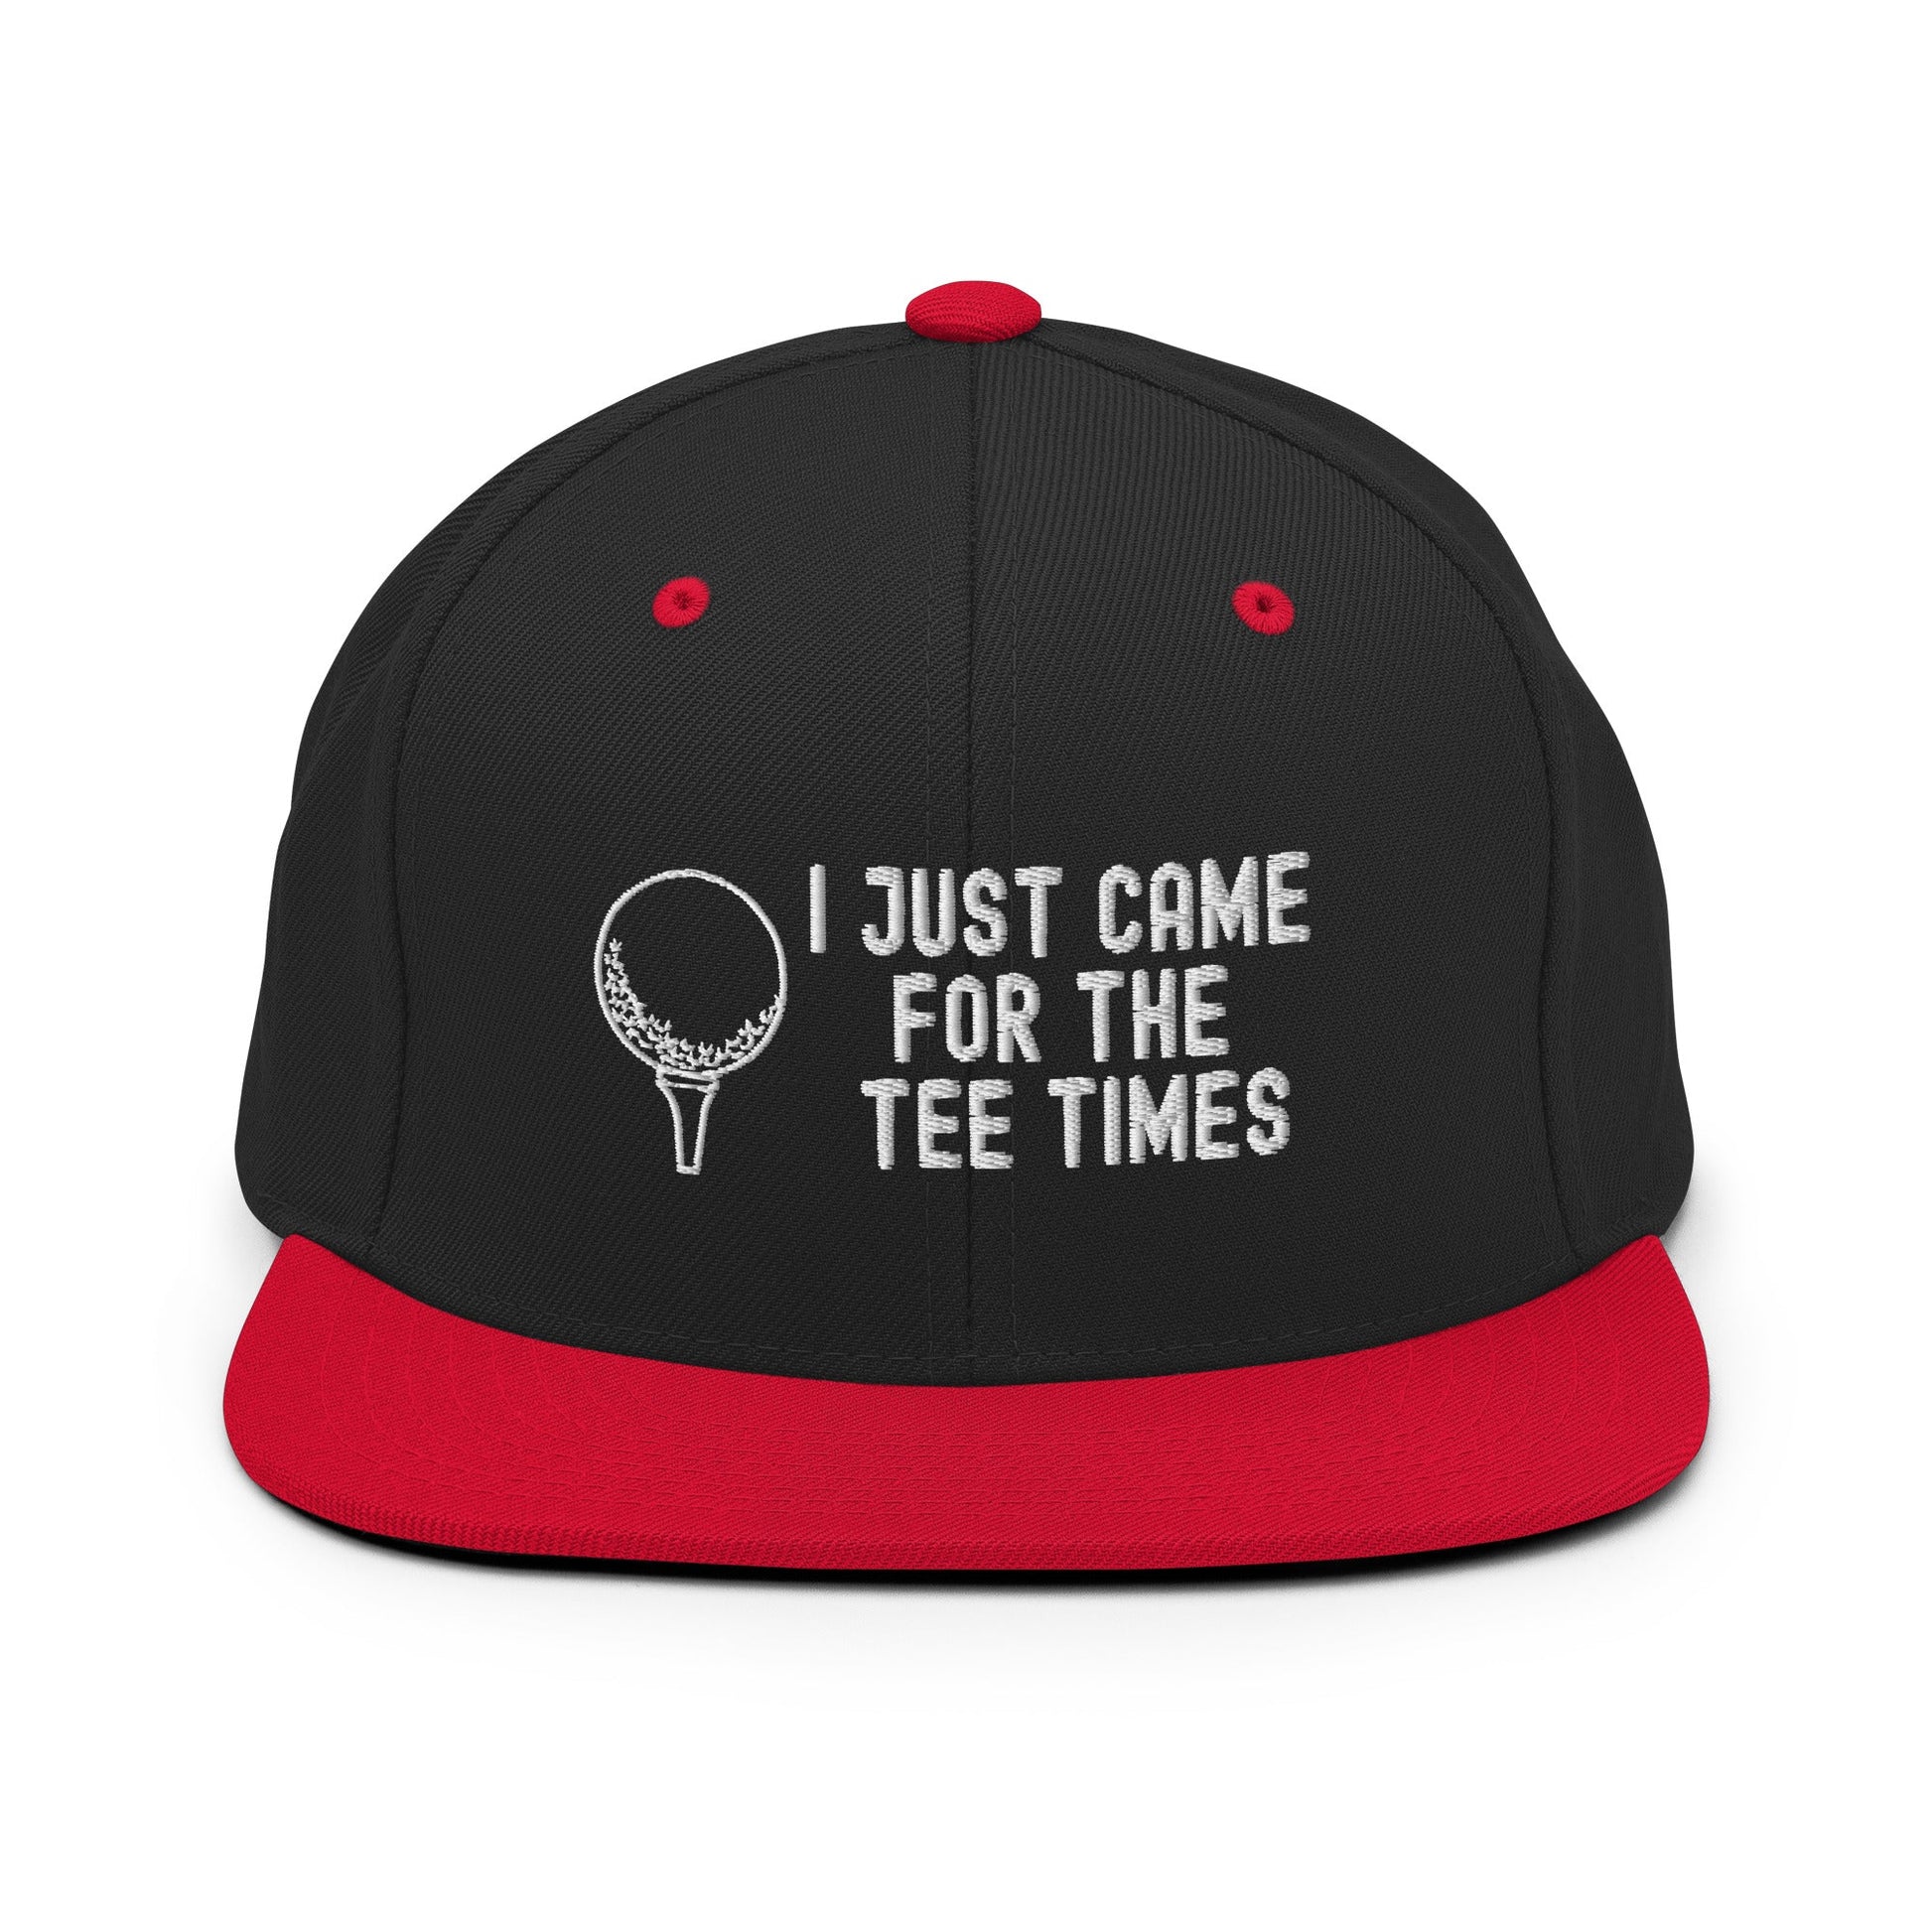 Funny Golfer Gifts  Snapback Hat Black/ Red I Just Came For The Tee Times Snapback Hat